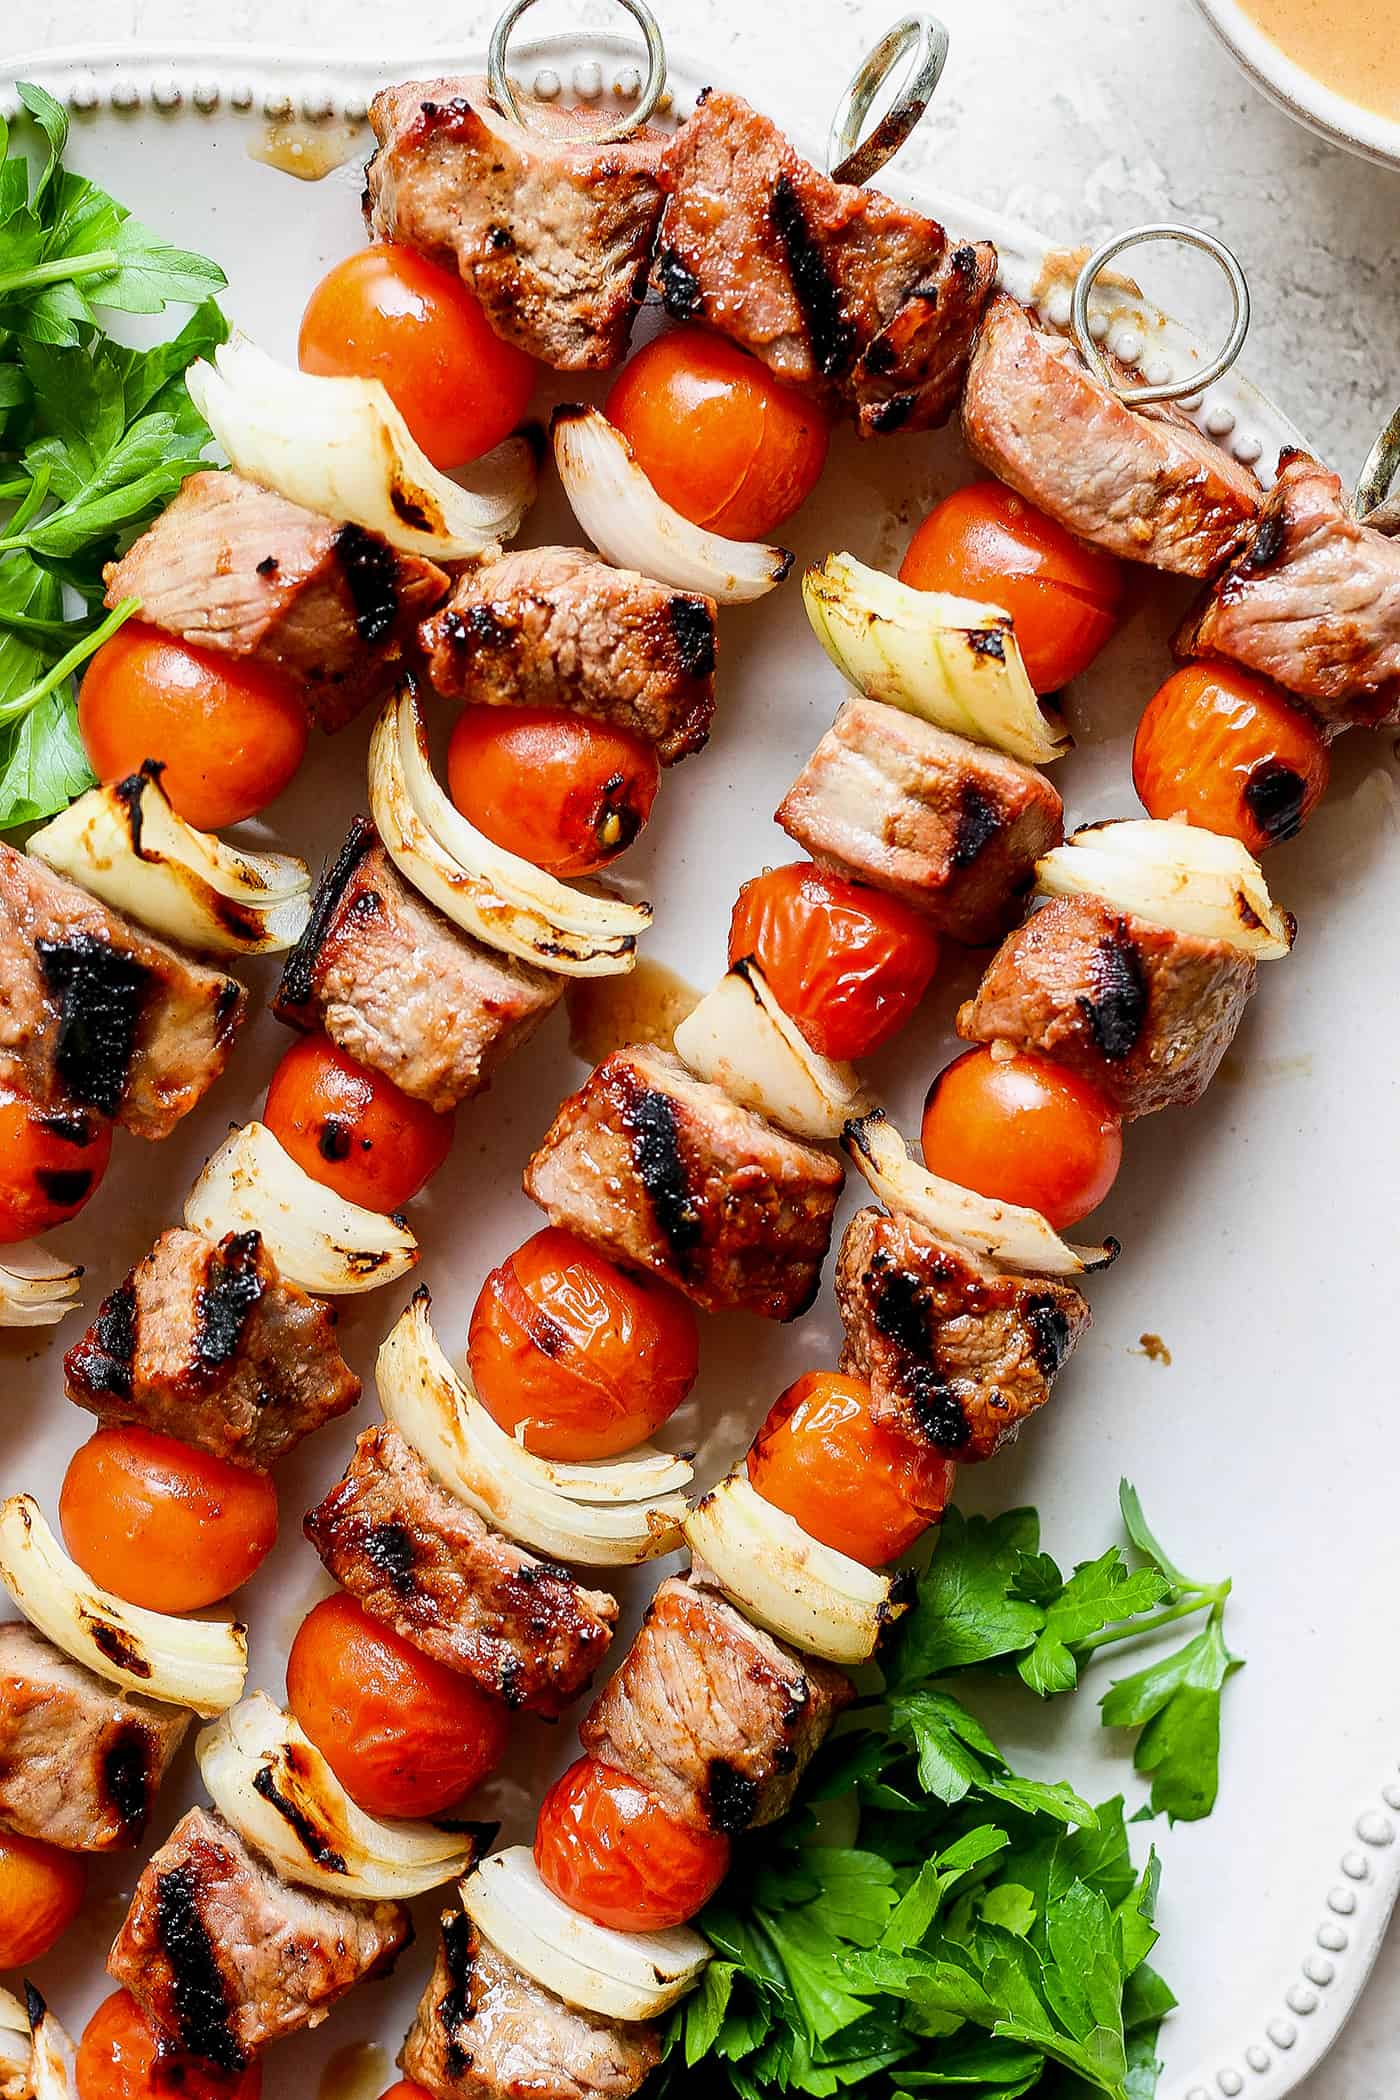 Honey mustard beef kabobs are shown together on a white plate.